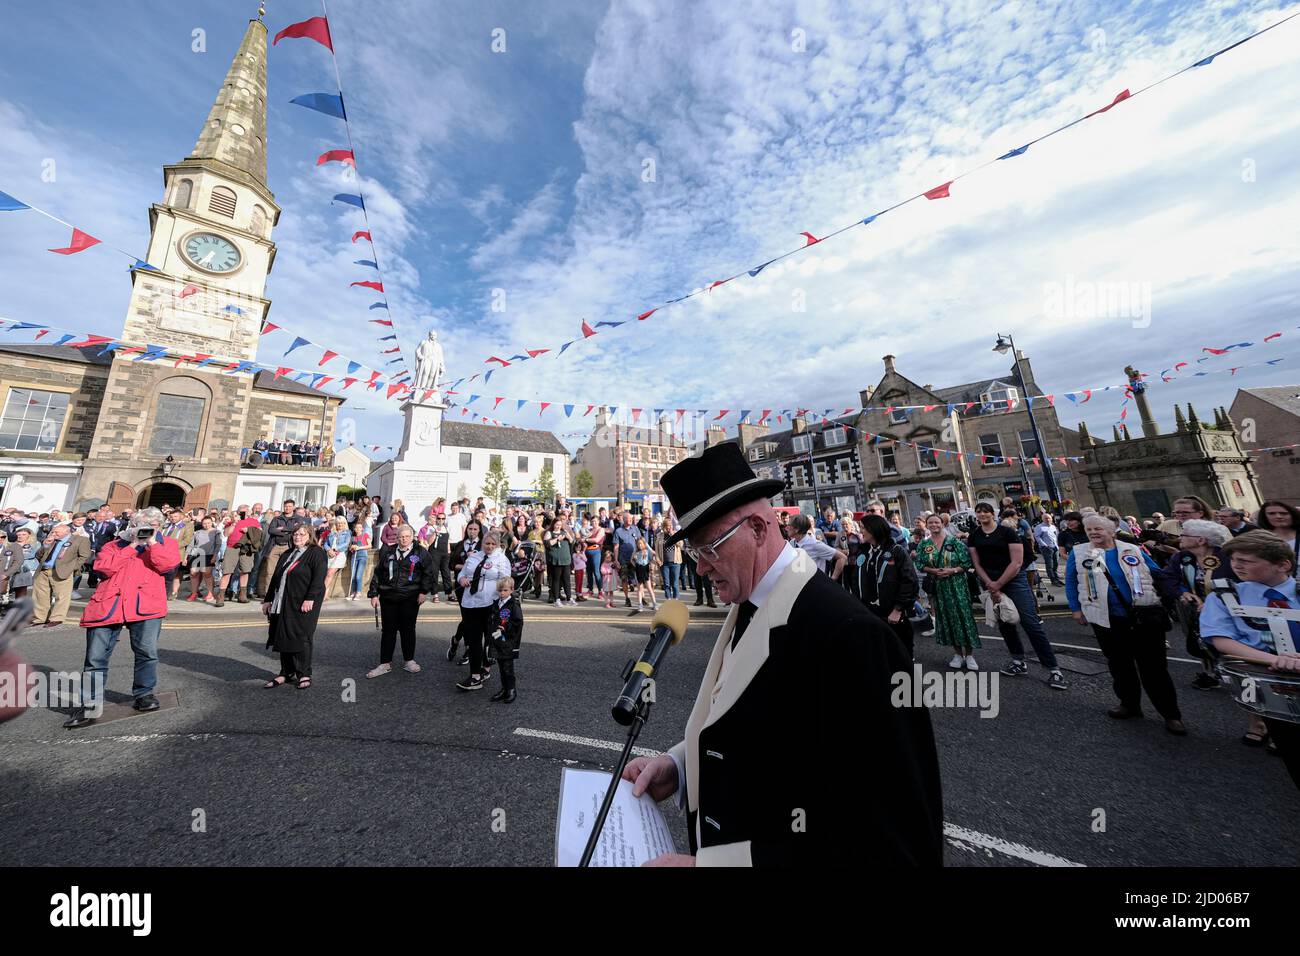 Selkirk, UK. 16.Jun.2022. Selkirk Common Riding 2022. Thursday, The Night afore the Morn. Senior Burgh Officer, Mr Graeme Bell led by the Flute band, preambles the streets starting in the West Port, at 1830hrs, stopping at significant junctions while walking a circuit of the Market Place, High Street, Back Row, Kirk Wynd for the “Crying of the Burley” and then onwards to the Victoria Halls, for the United Crafts Colour Bussin. At 2000hrs during the proceedings the Selkirk Ex-Royal Burgh Standard Bearers form up in a parade to march to the 'Fletcher Memorial' and lay a wreath and mark respec Stock Photo